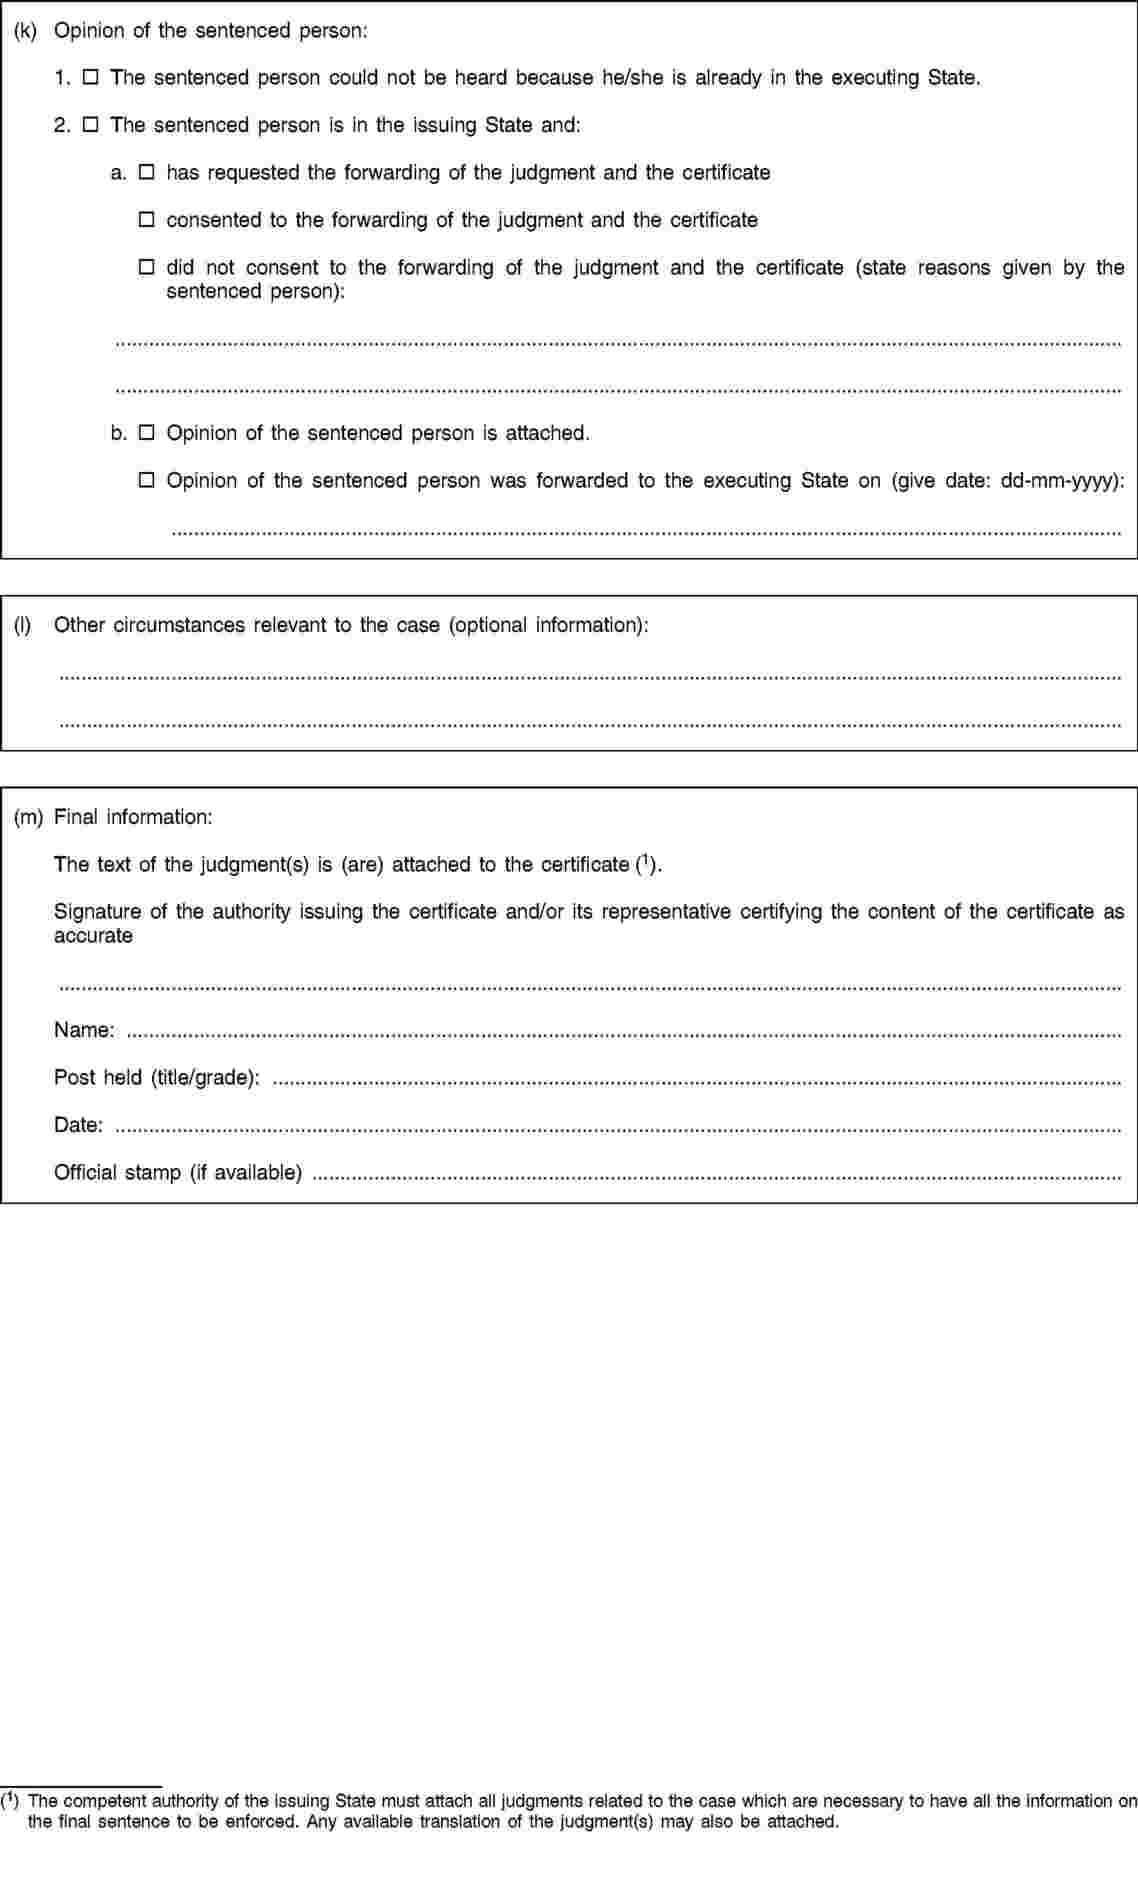 Ratifying the Constitution Worksheet Answers and Chapter 2 Section 5 Ratifying the Constitution Worksheet Answers